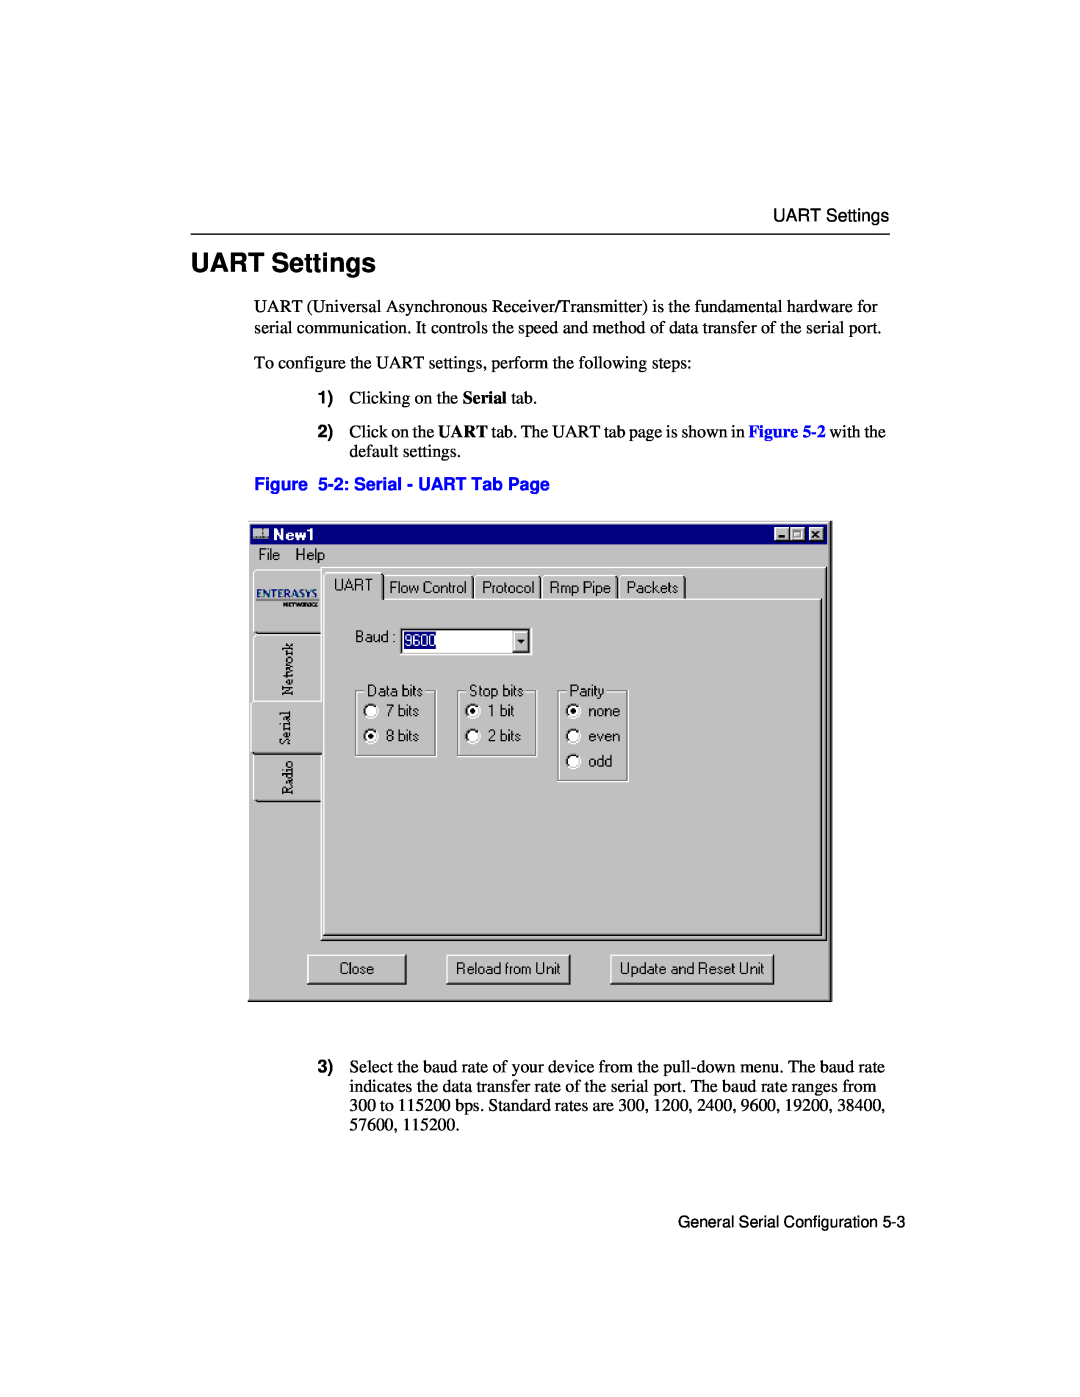 Enterasys Networks Wireless Ethernet Adapter I manual UART Settings, 2 Serial - UART Tab Page 